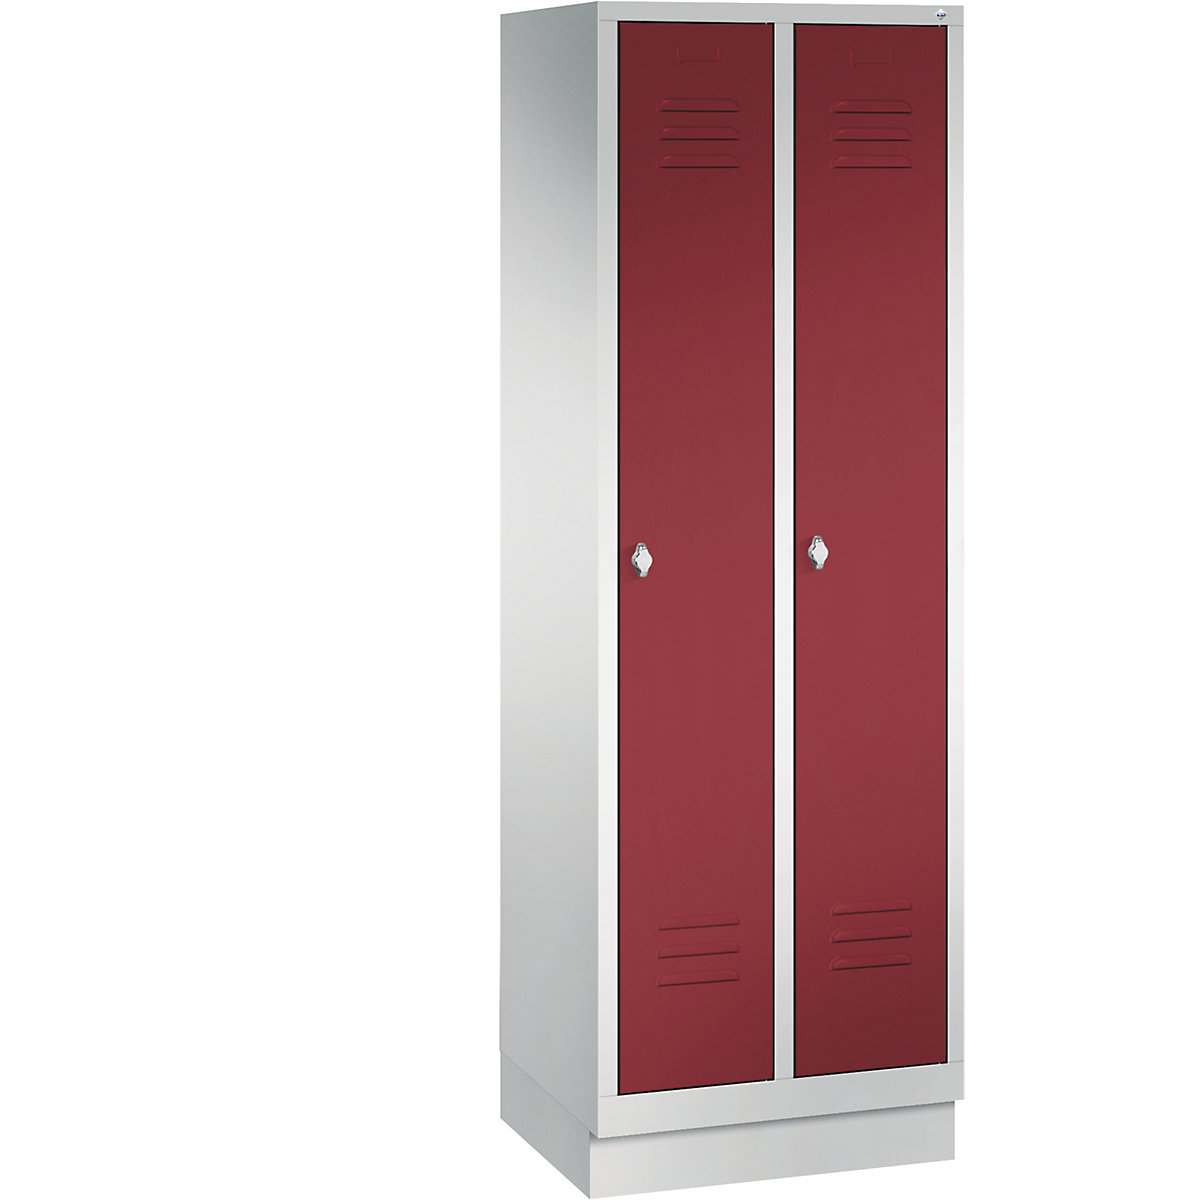 CLASSIC storage cupboard with plinth – C+P, 2 compartments, compartment width 300 mm, light grey / ruby red-13